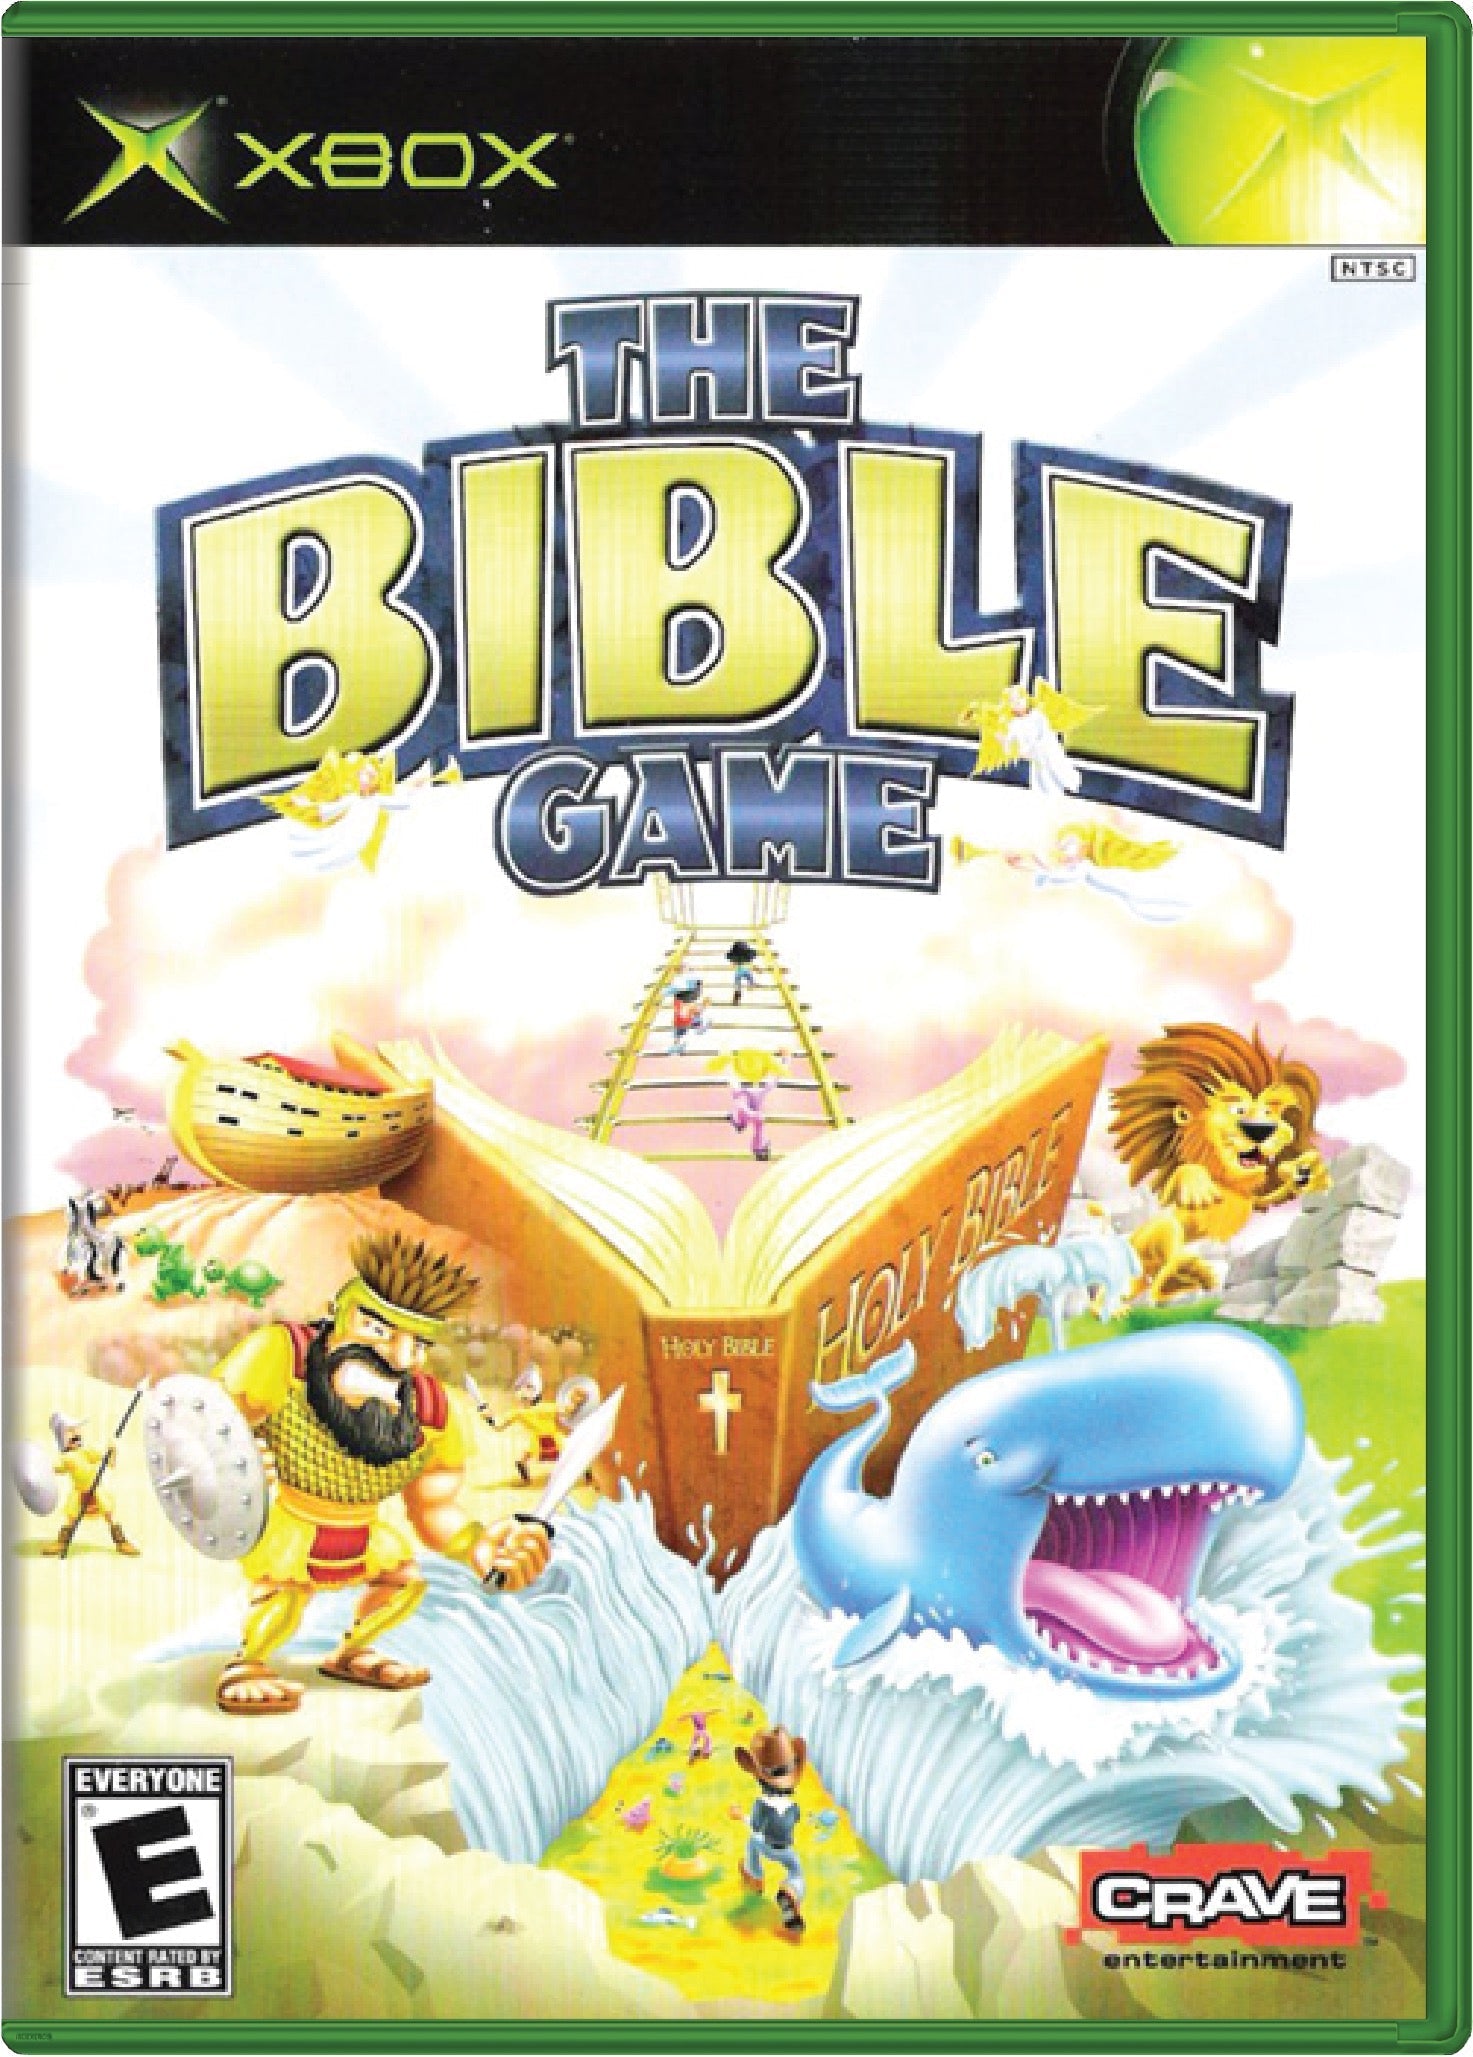 The Bible Game Cover Art